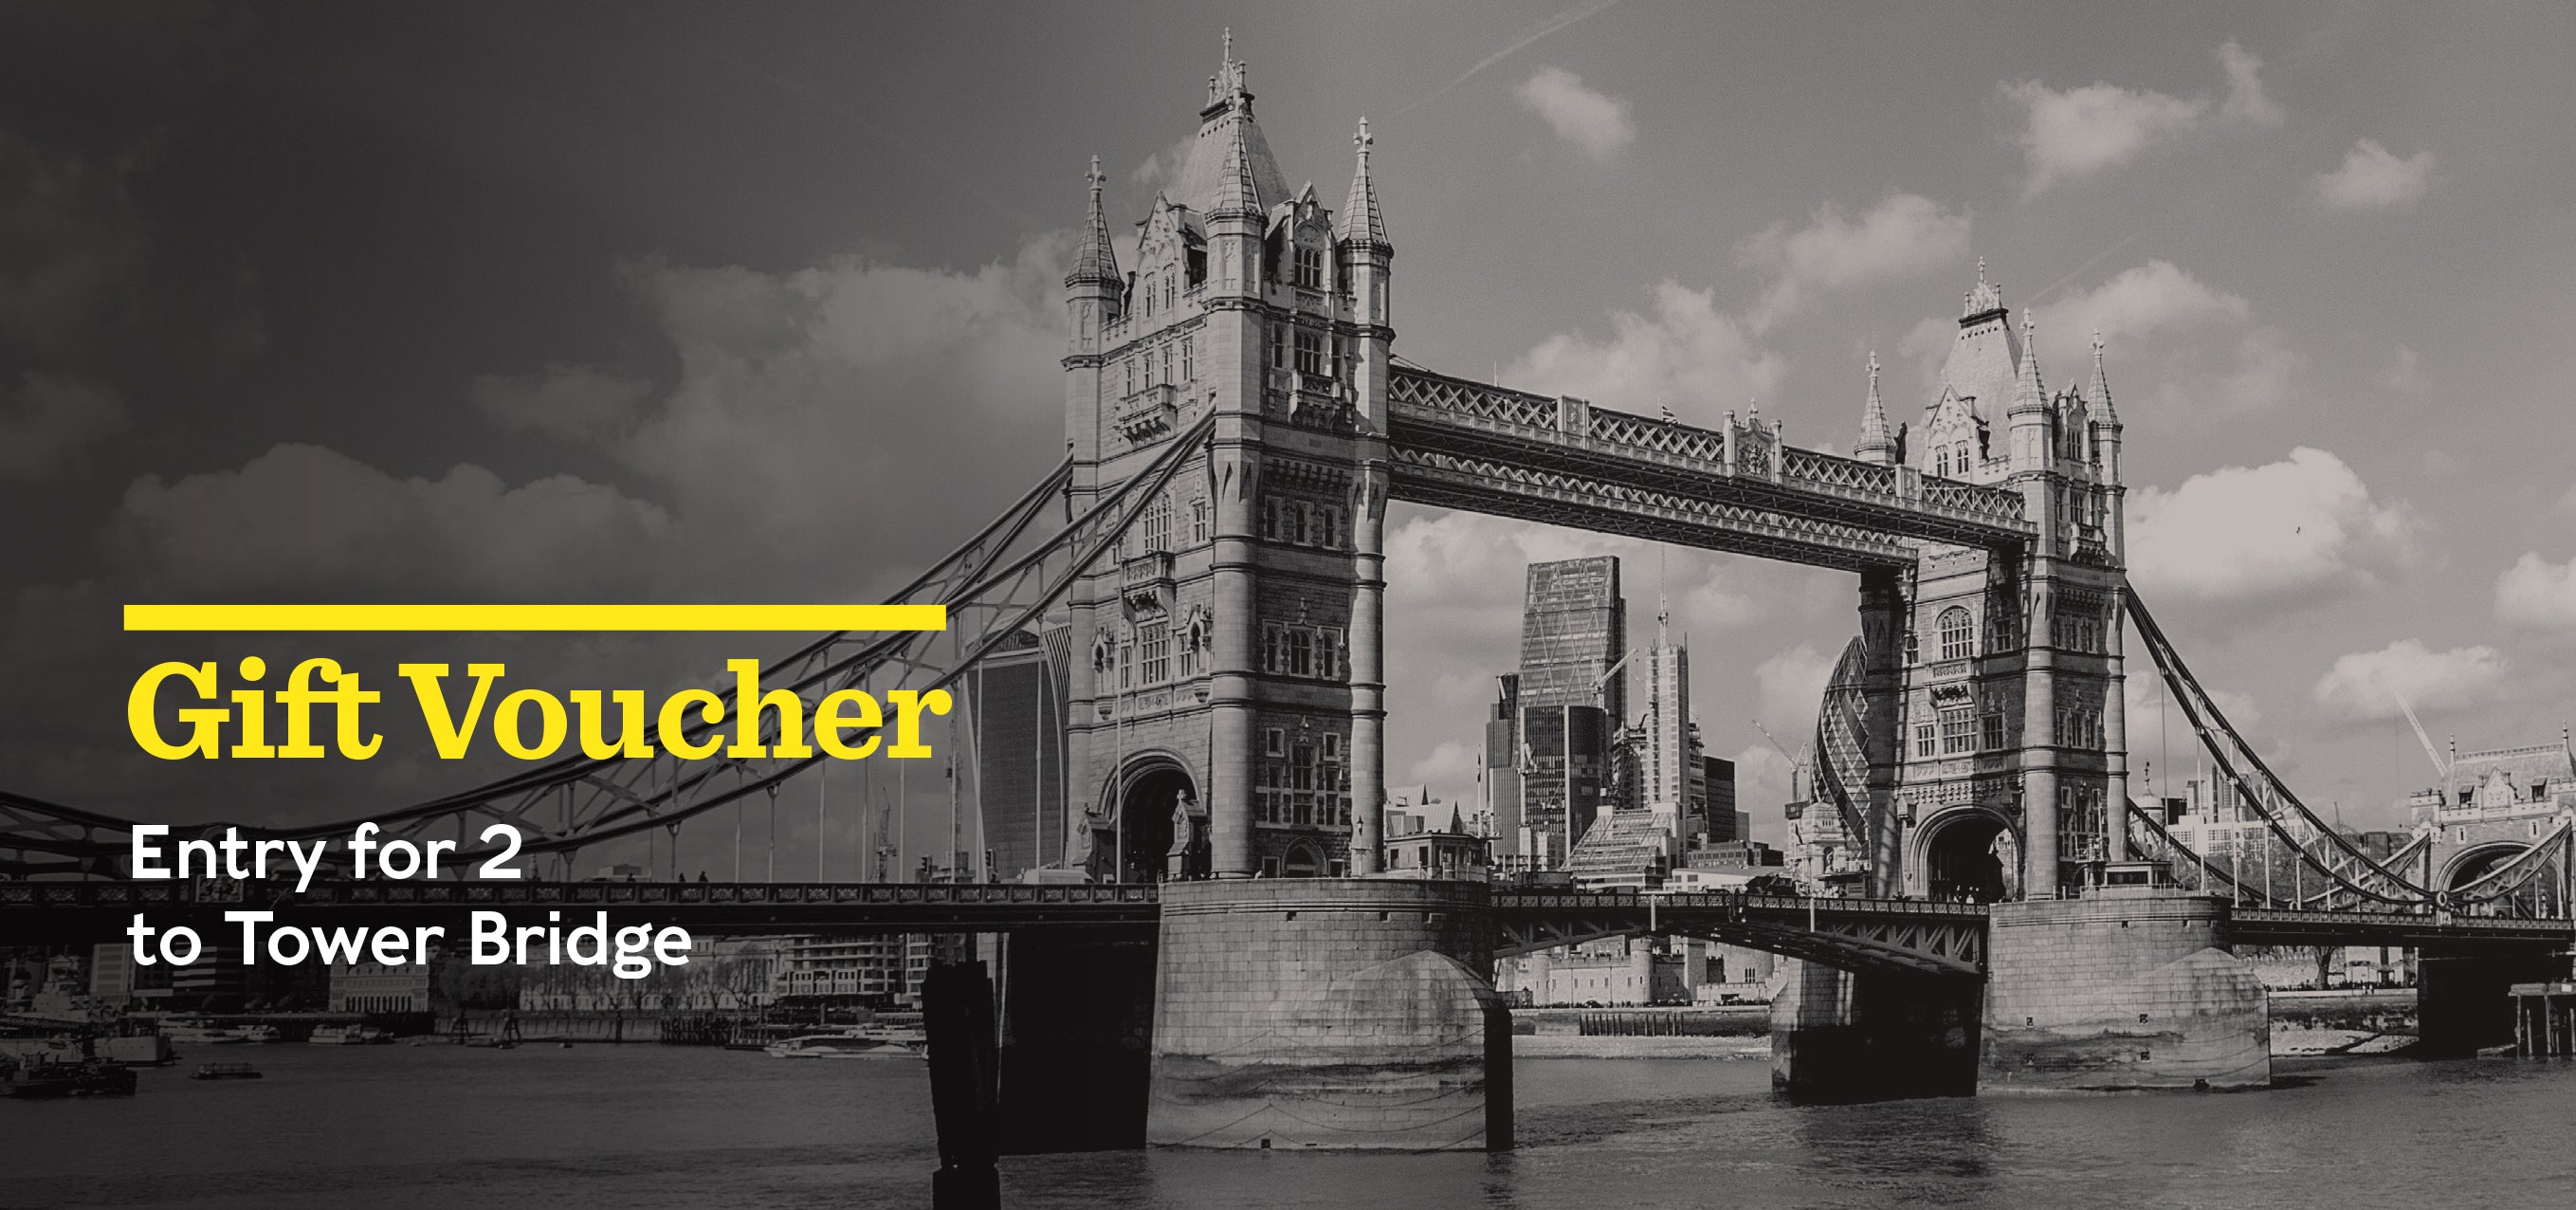 Gift Voucher - Entry for 2 to Tower Bridge